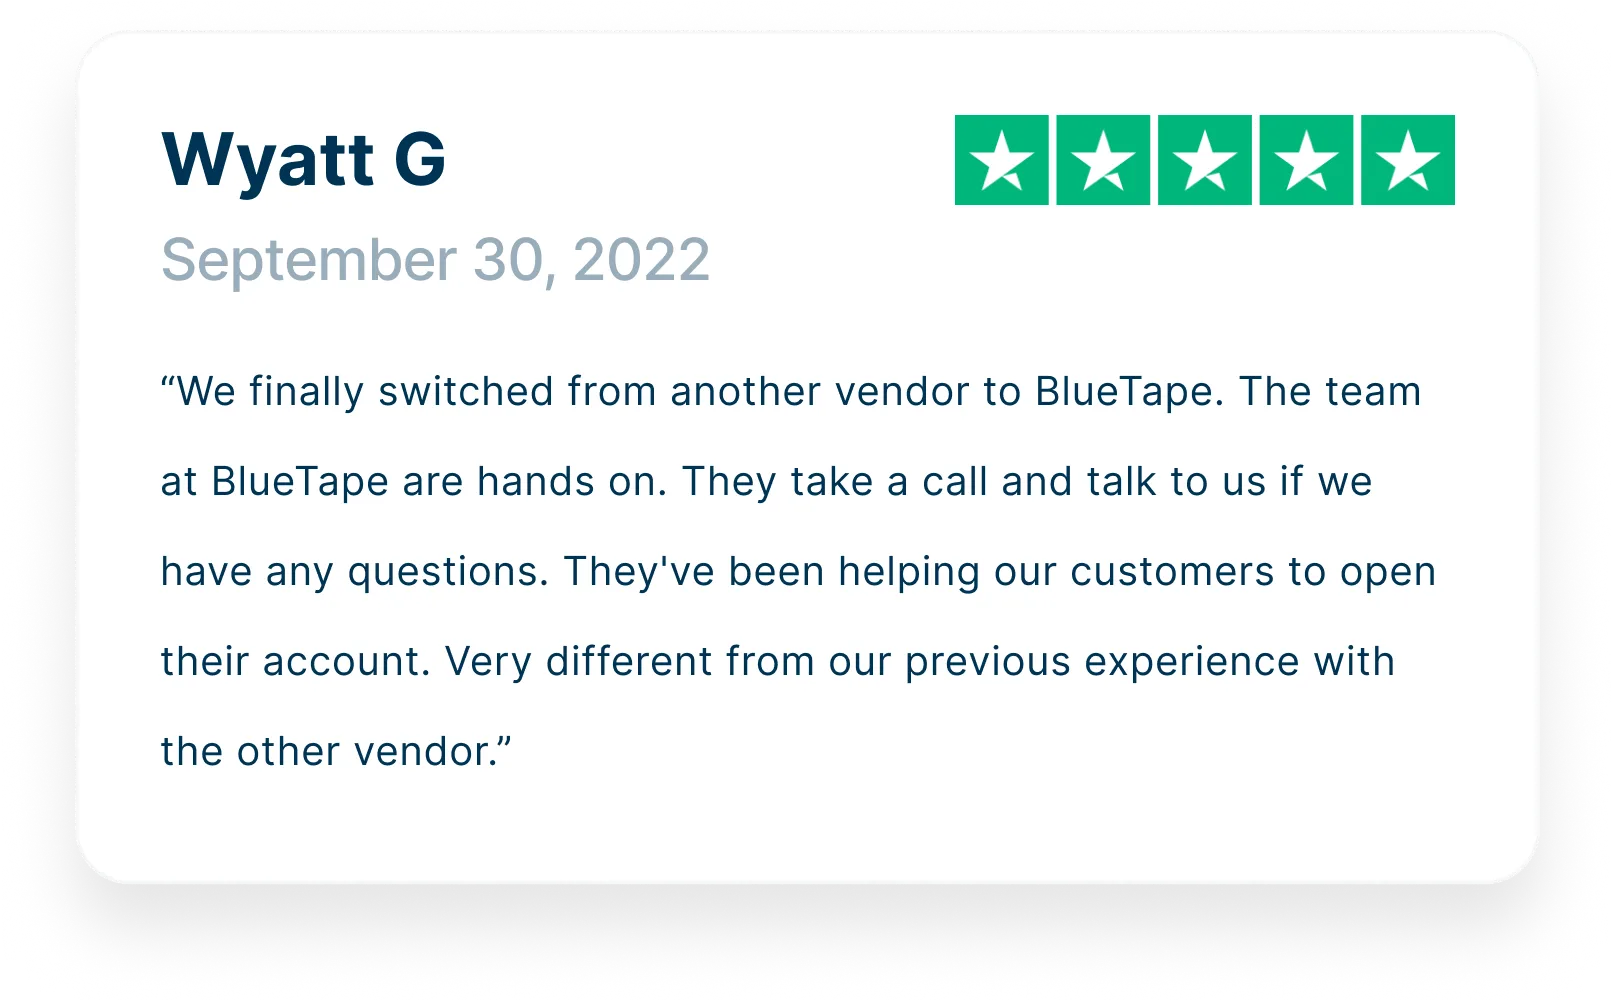 “We finally switched from another vendor to BlueTape. The team at BlueTape are hands on. They take a call and talk to us if we have any questions. They've been helping our customers to open their account. Very different from our previous experience with the other vendor.”